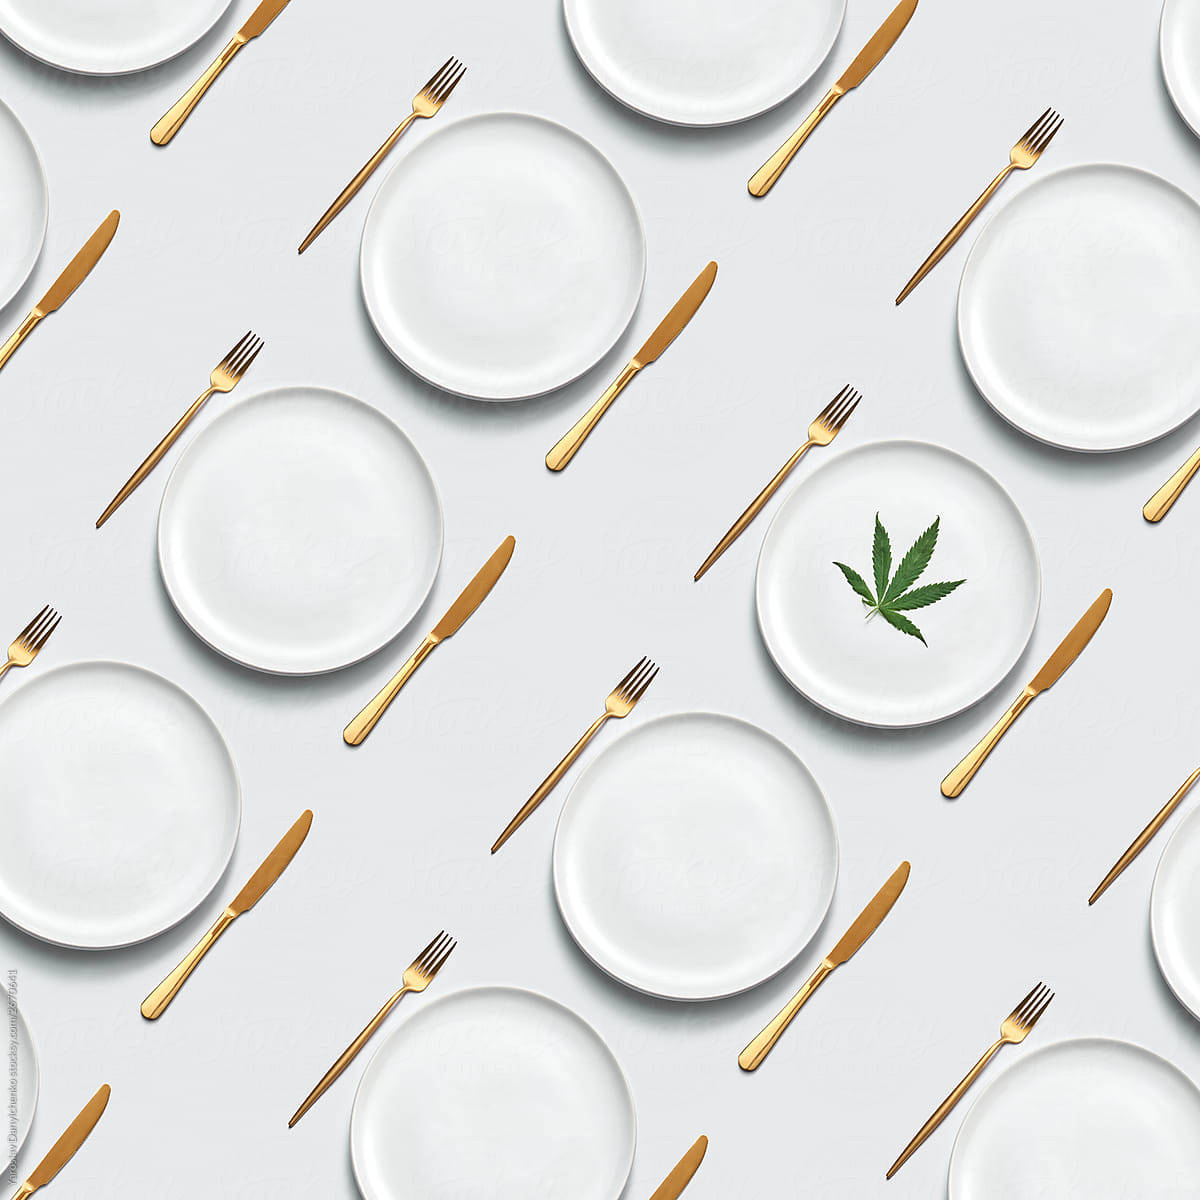 Pattern of plates and utensils with cannabis leaf